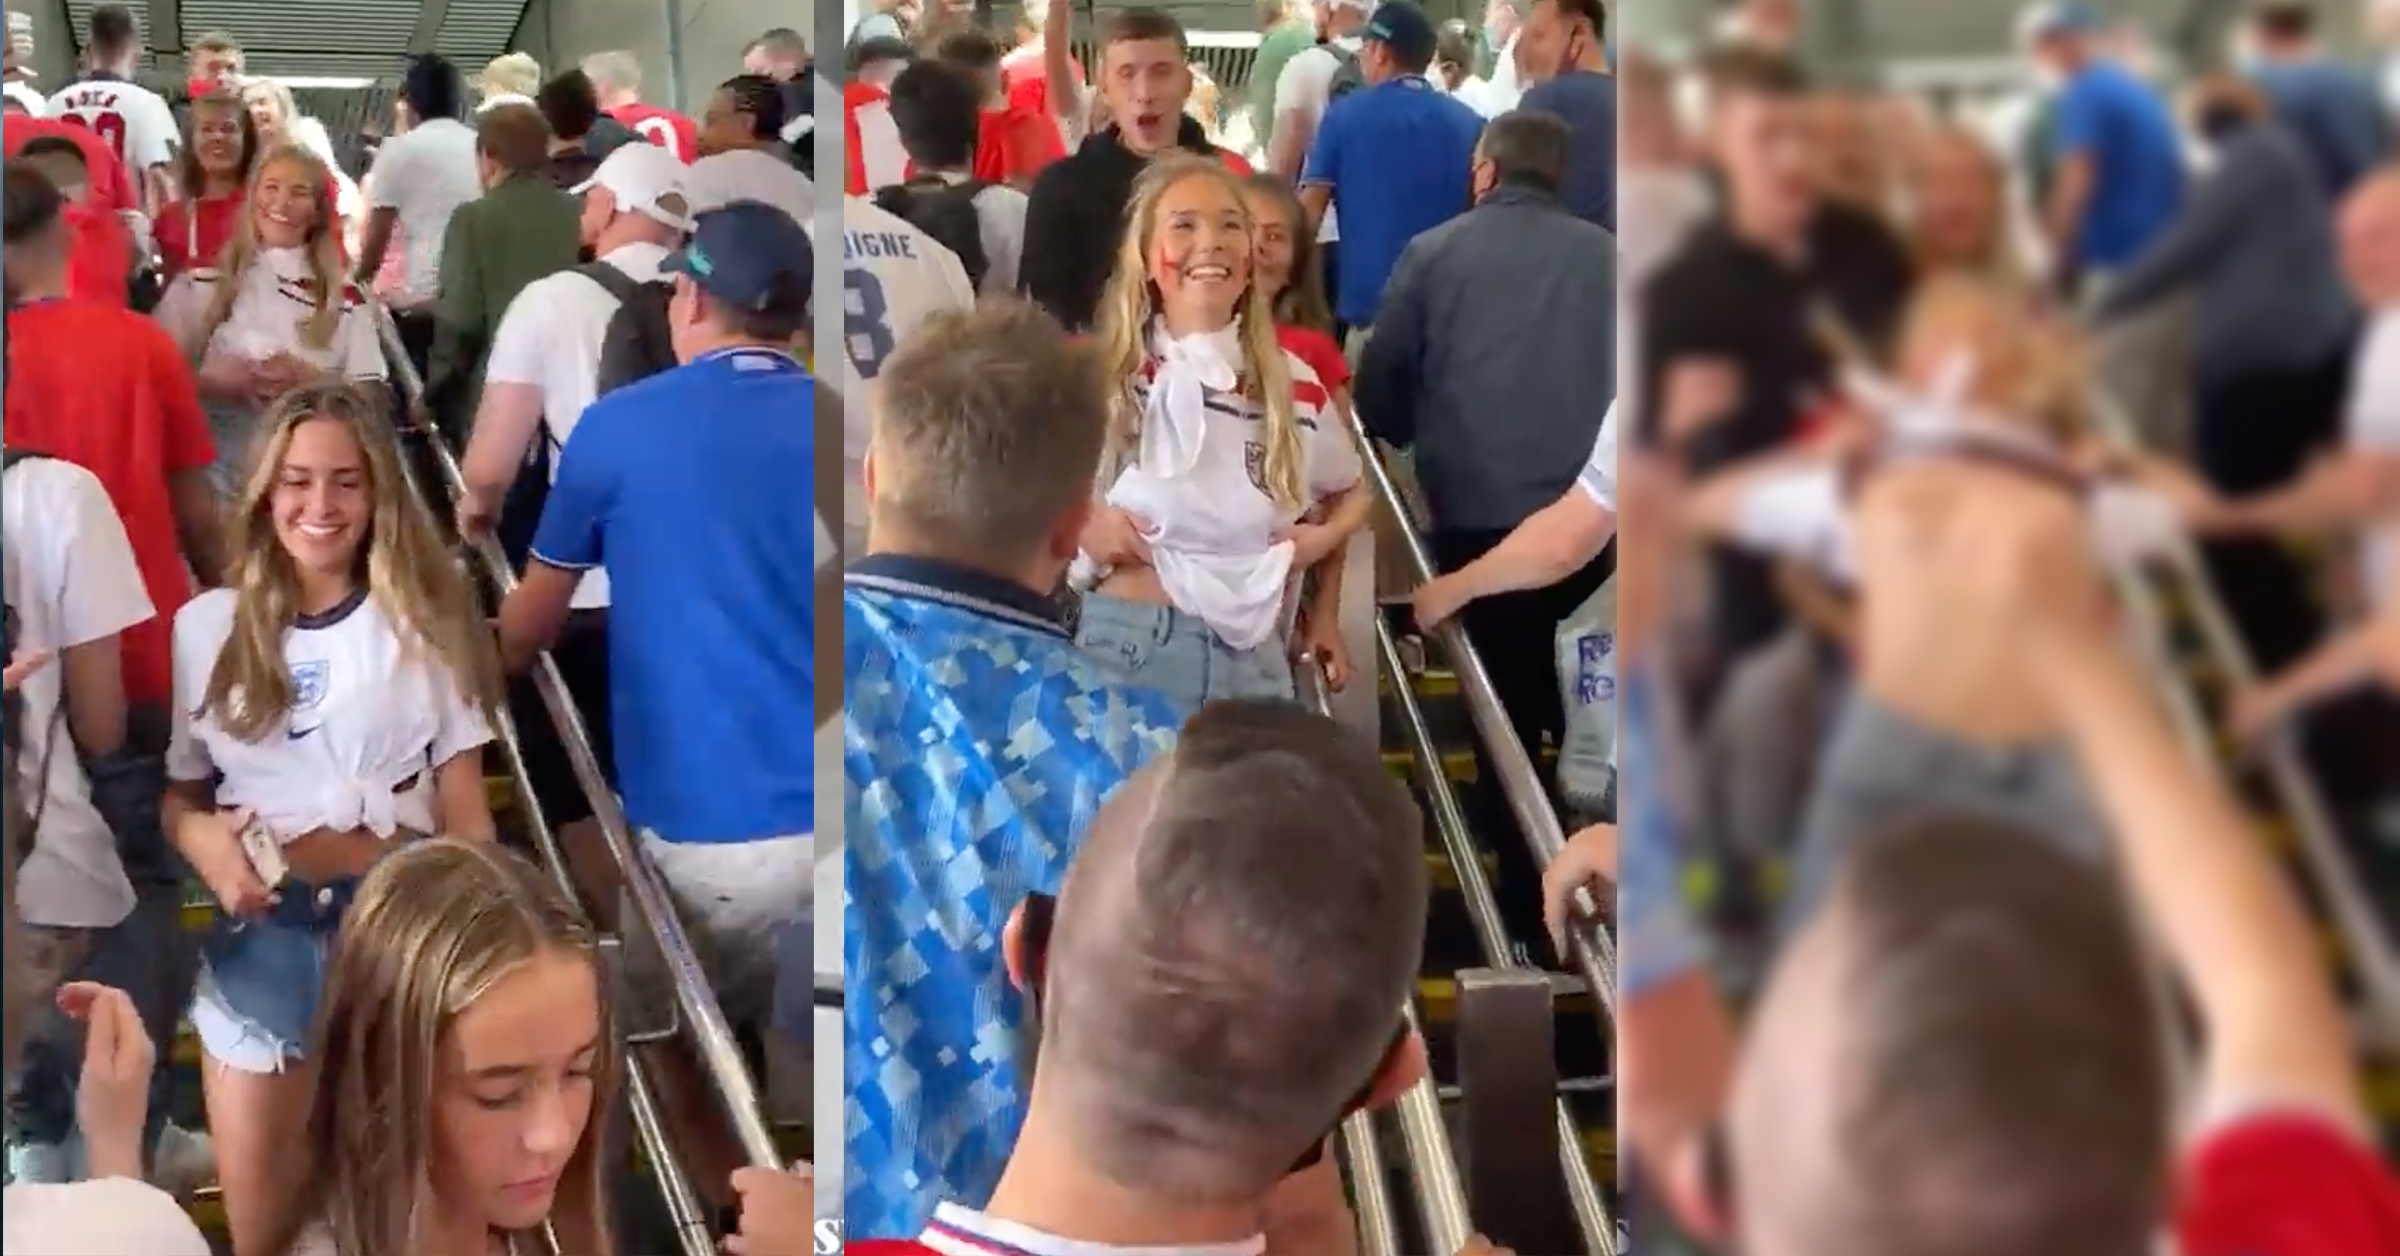 England fan flashes on stairs